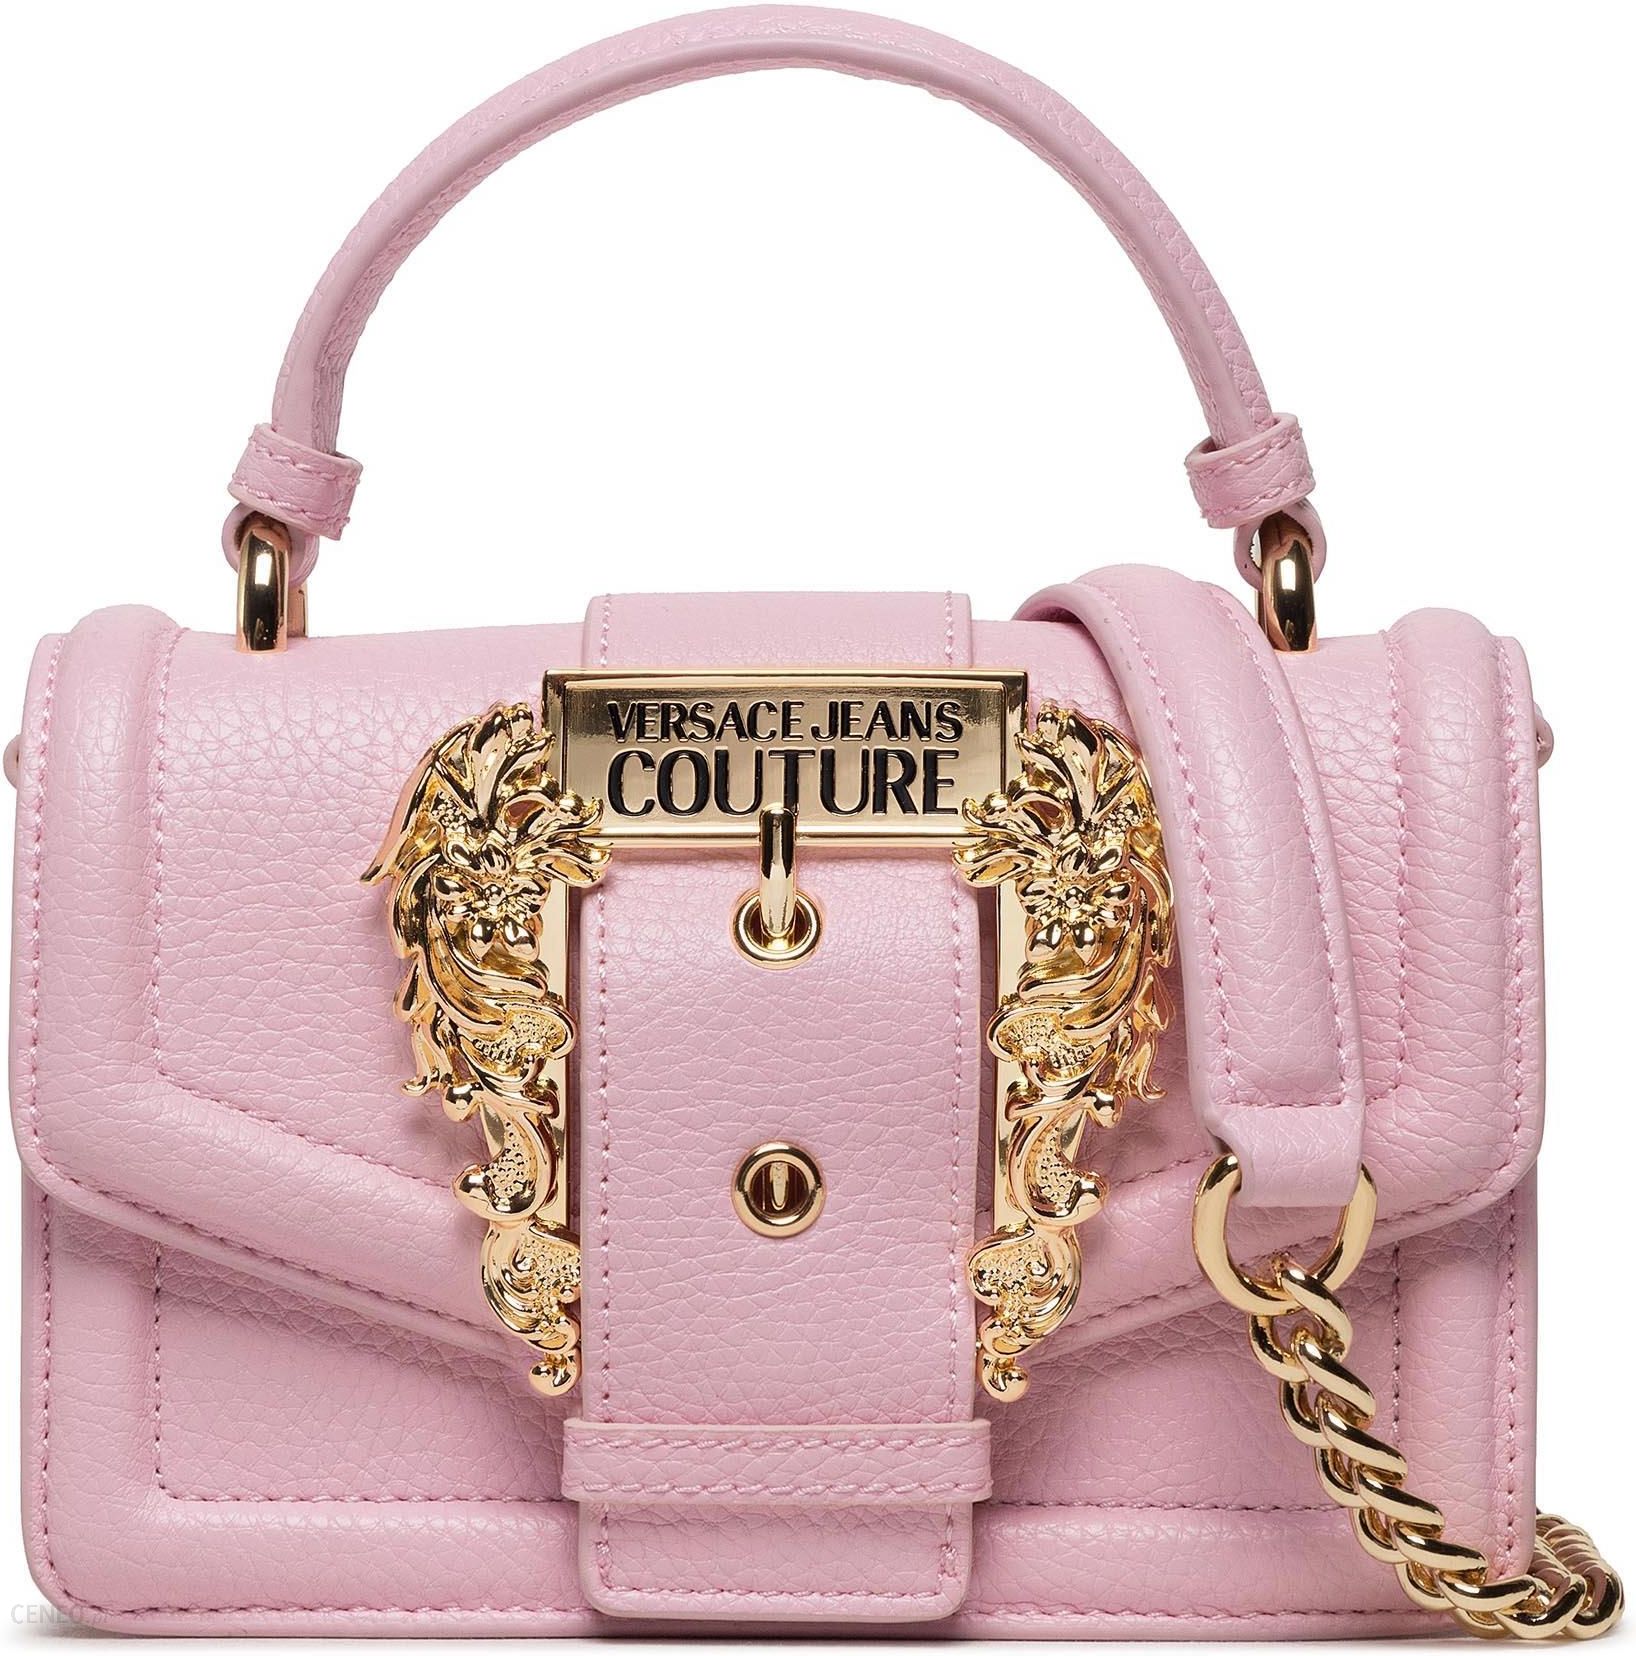 Handbags Versace Jeans Couture , Style code: 73va4bf6-zs414-416